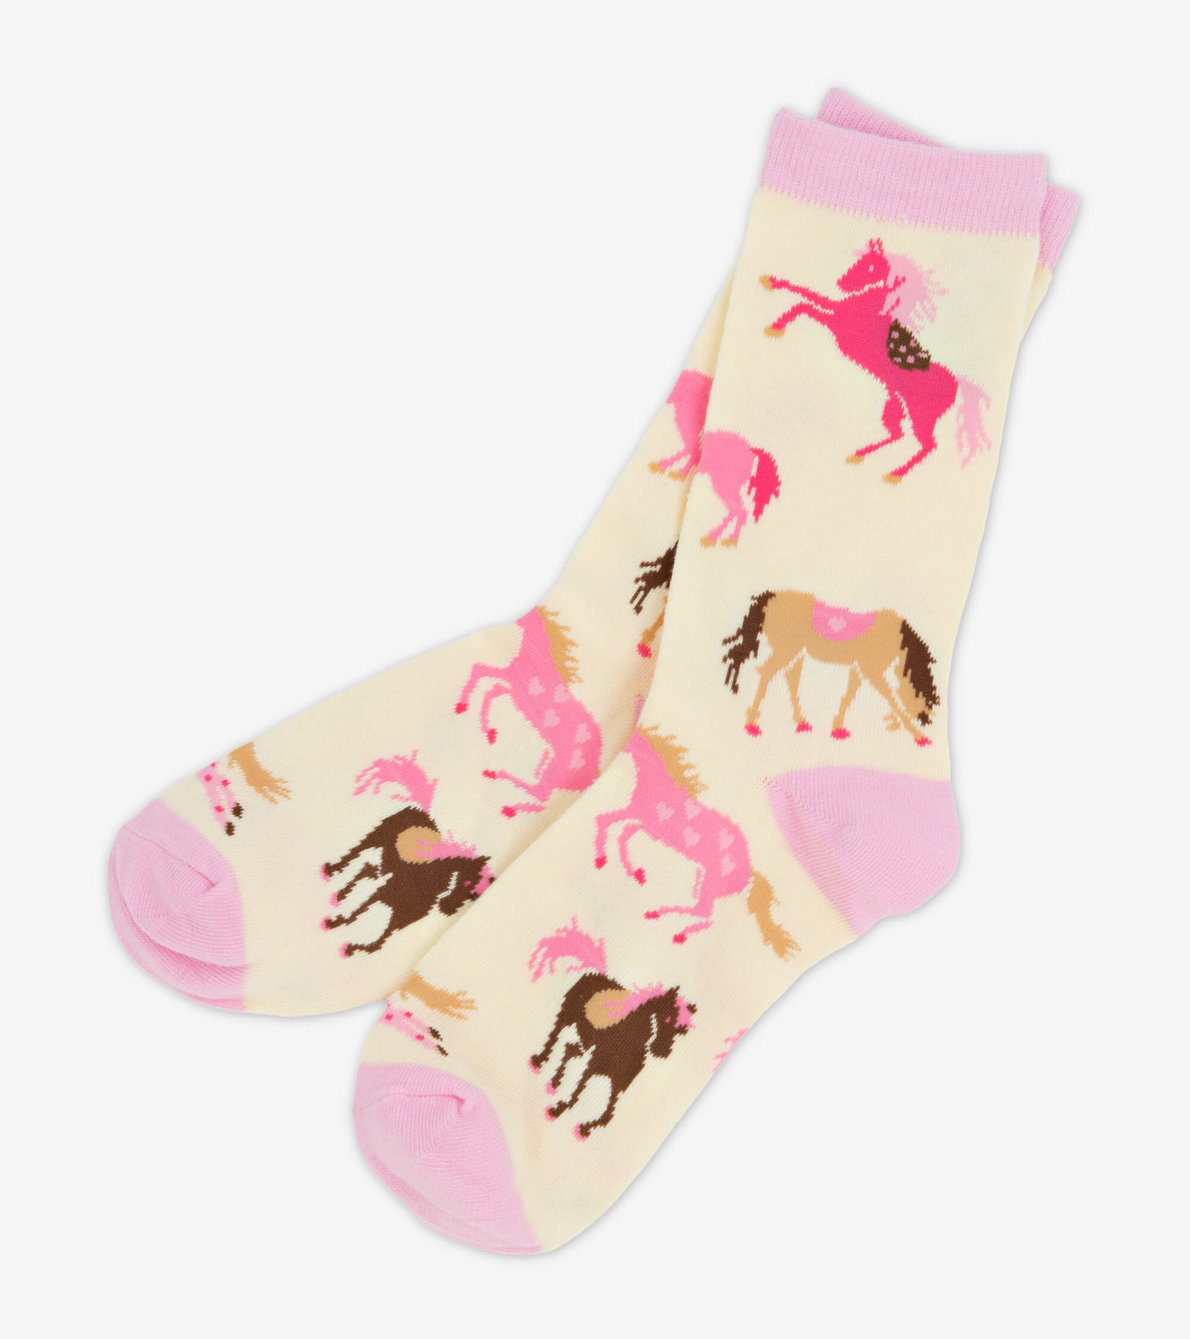 View larger image of Hearts & Horses Women's Crew Socks